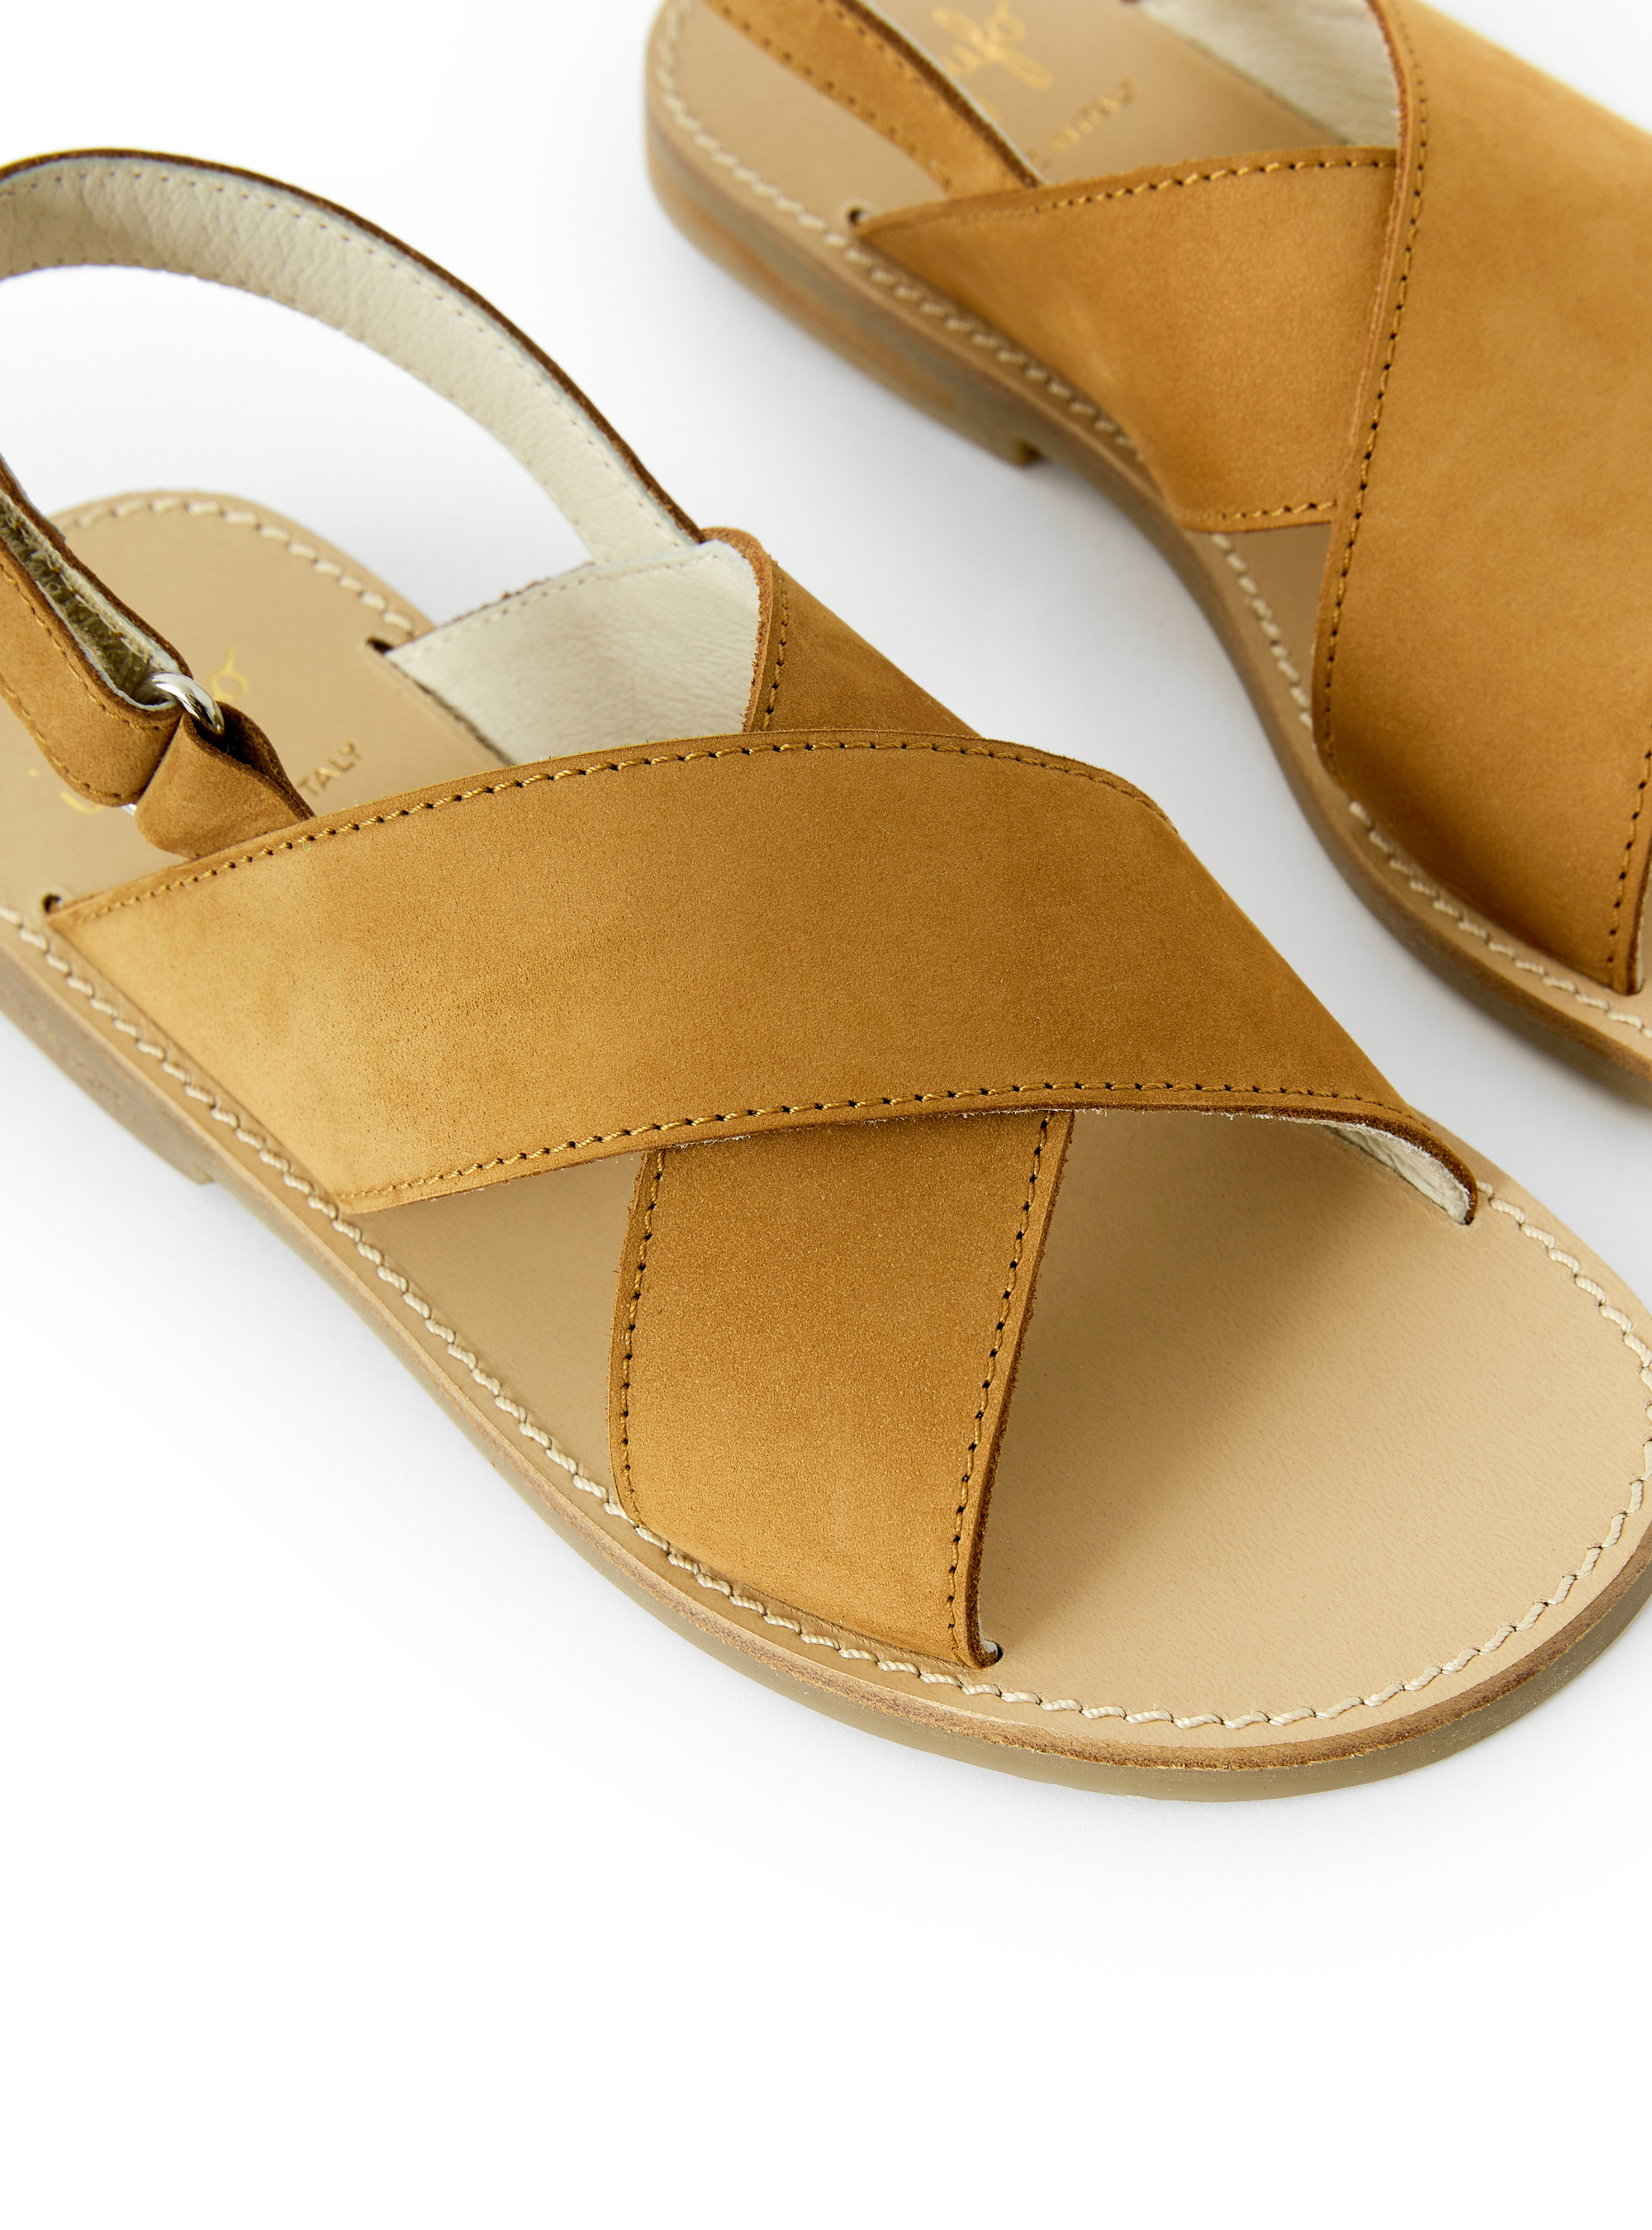 Beige sandal with crossed bands - Brown | Il Gufo